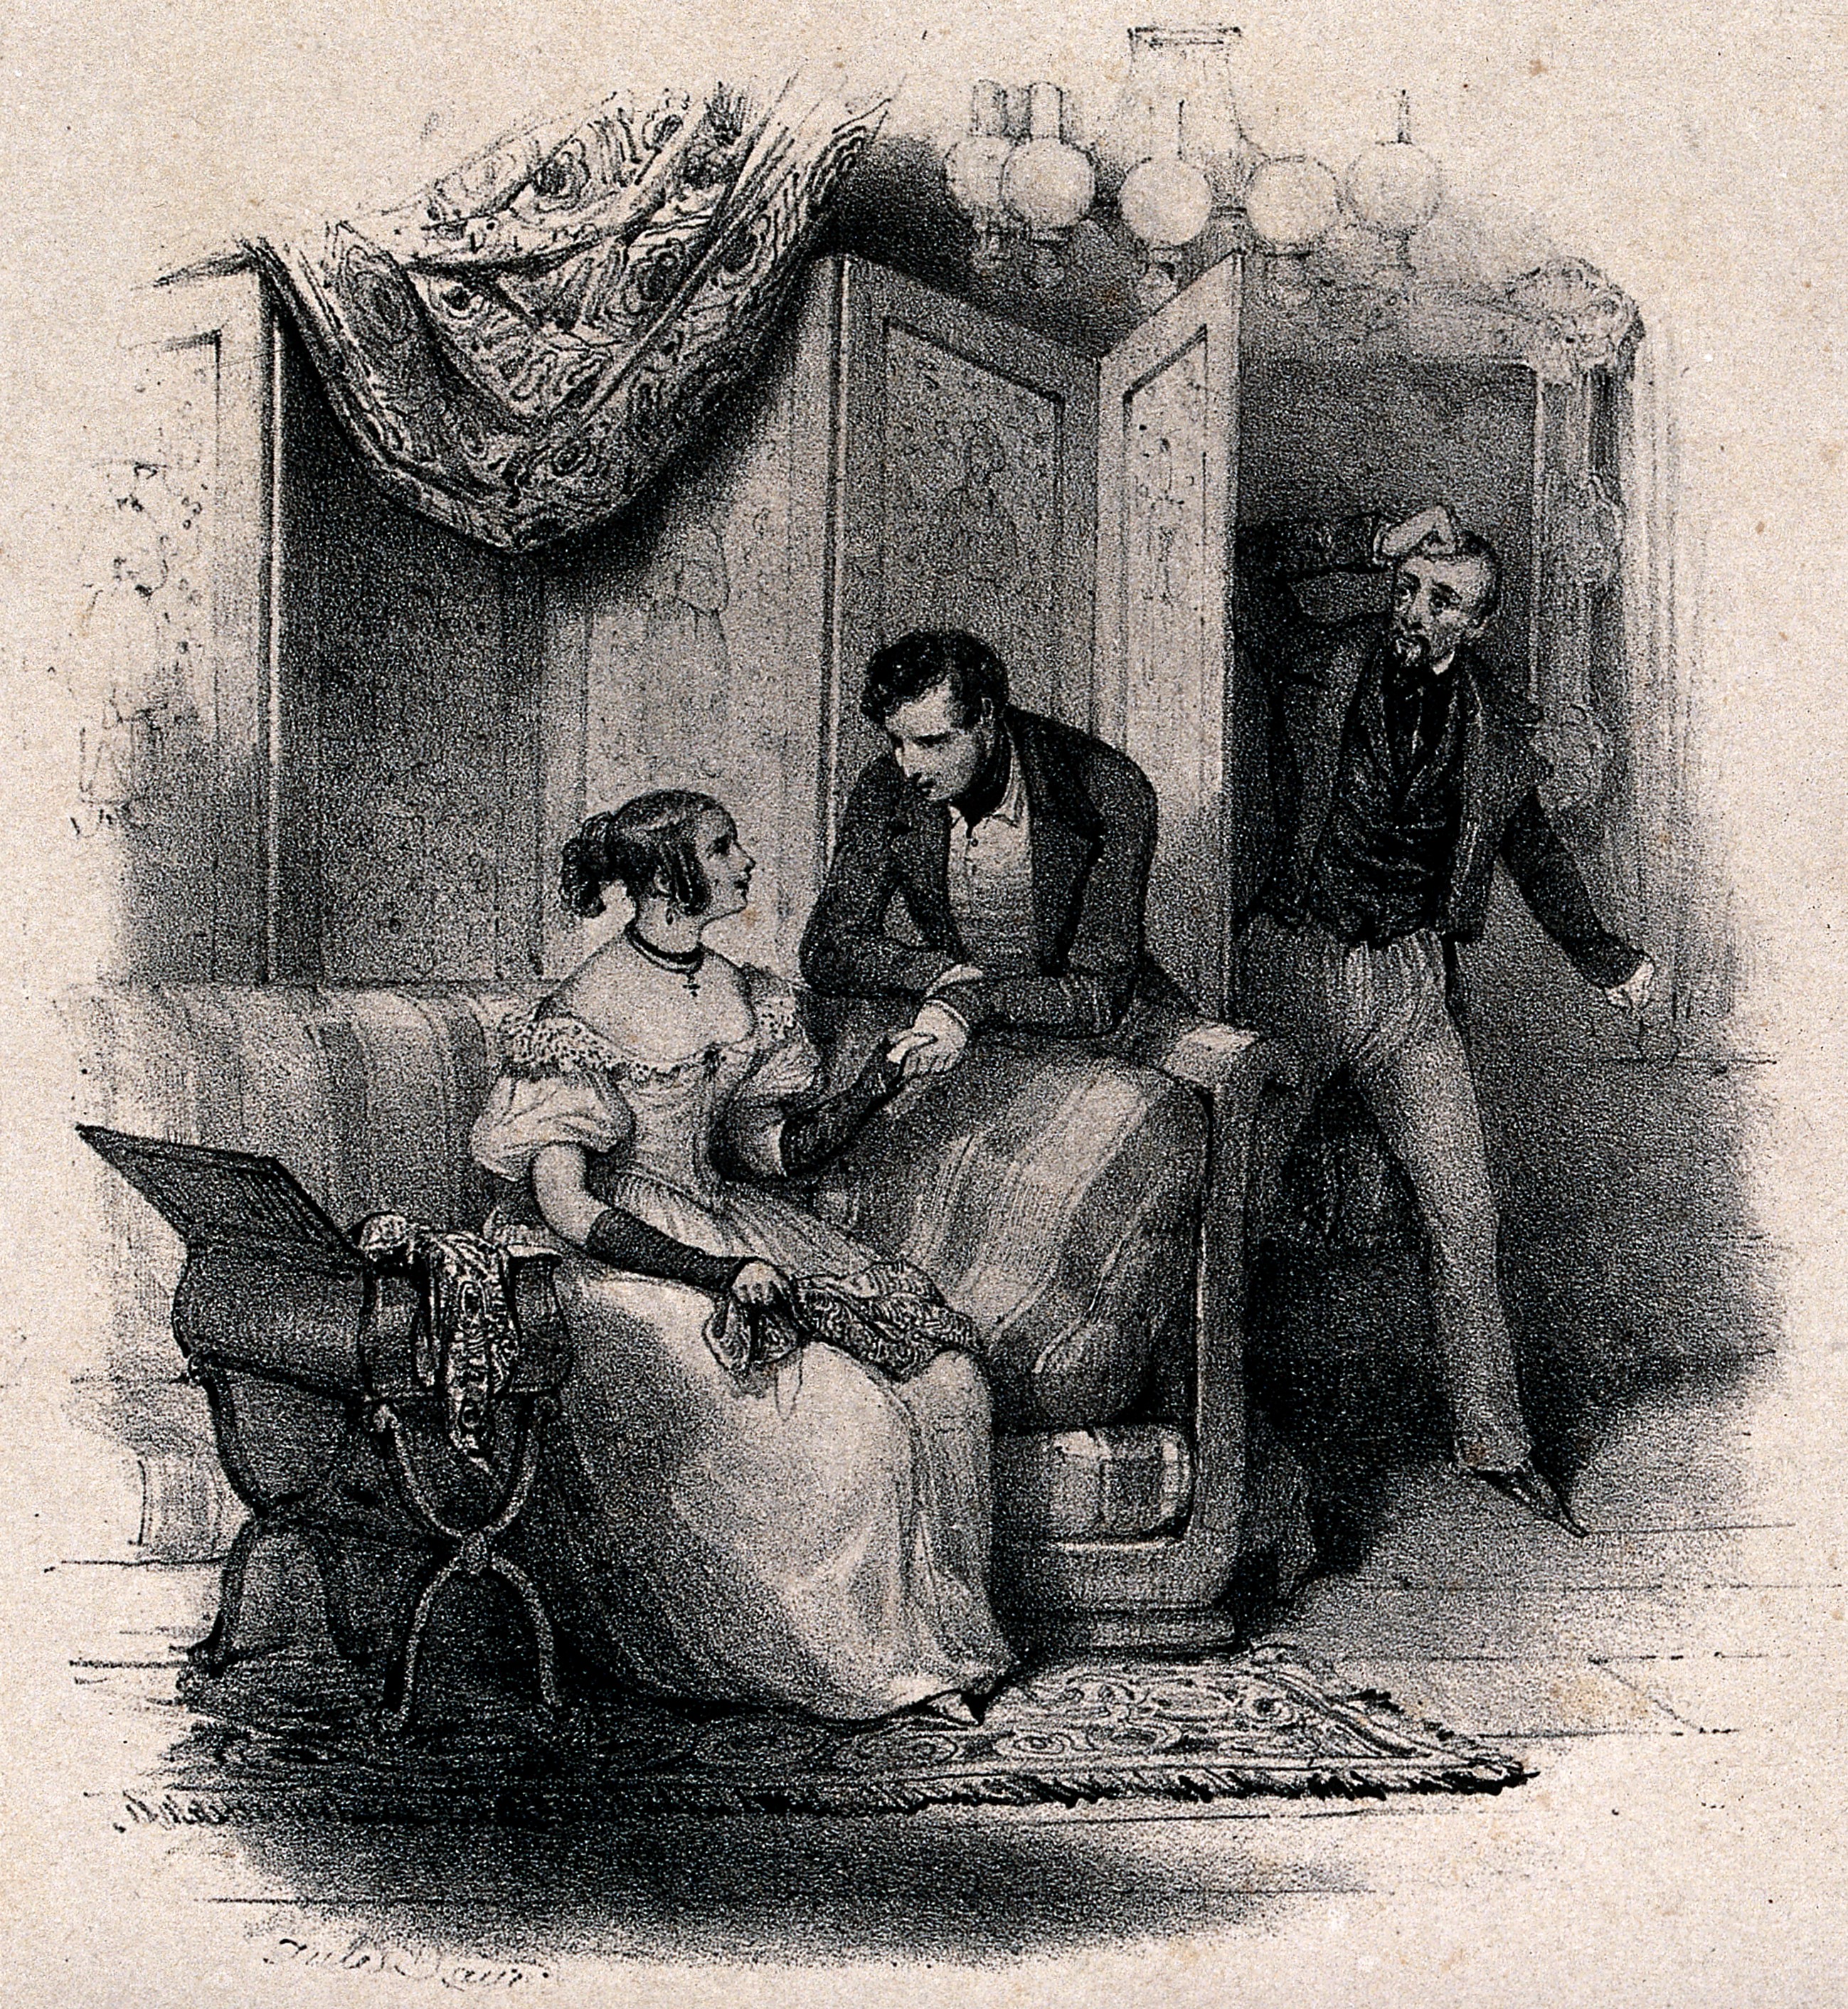 https://upload.wikimedia.org/wikipedia/commons/8/8a/A_young_woman_sits_on_a_sofa_talking_to_a_young_man_who_is_l_Wellcome_V0039054.jpg